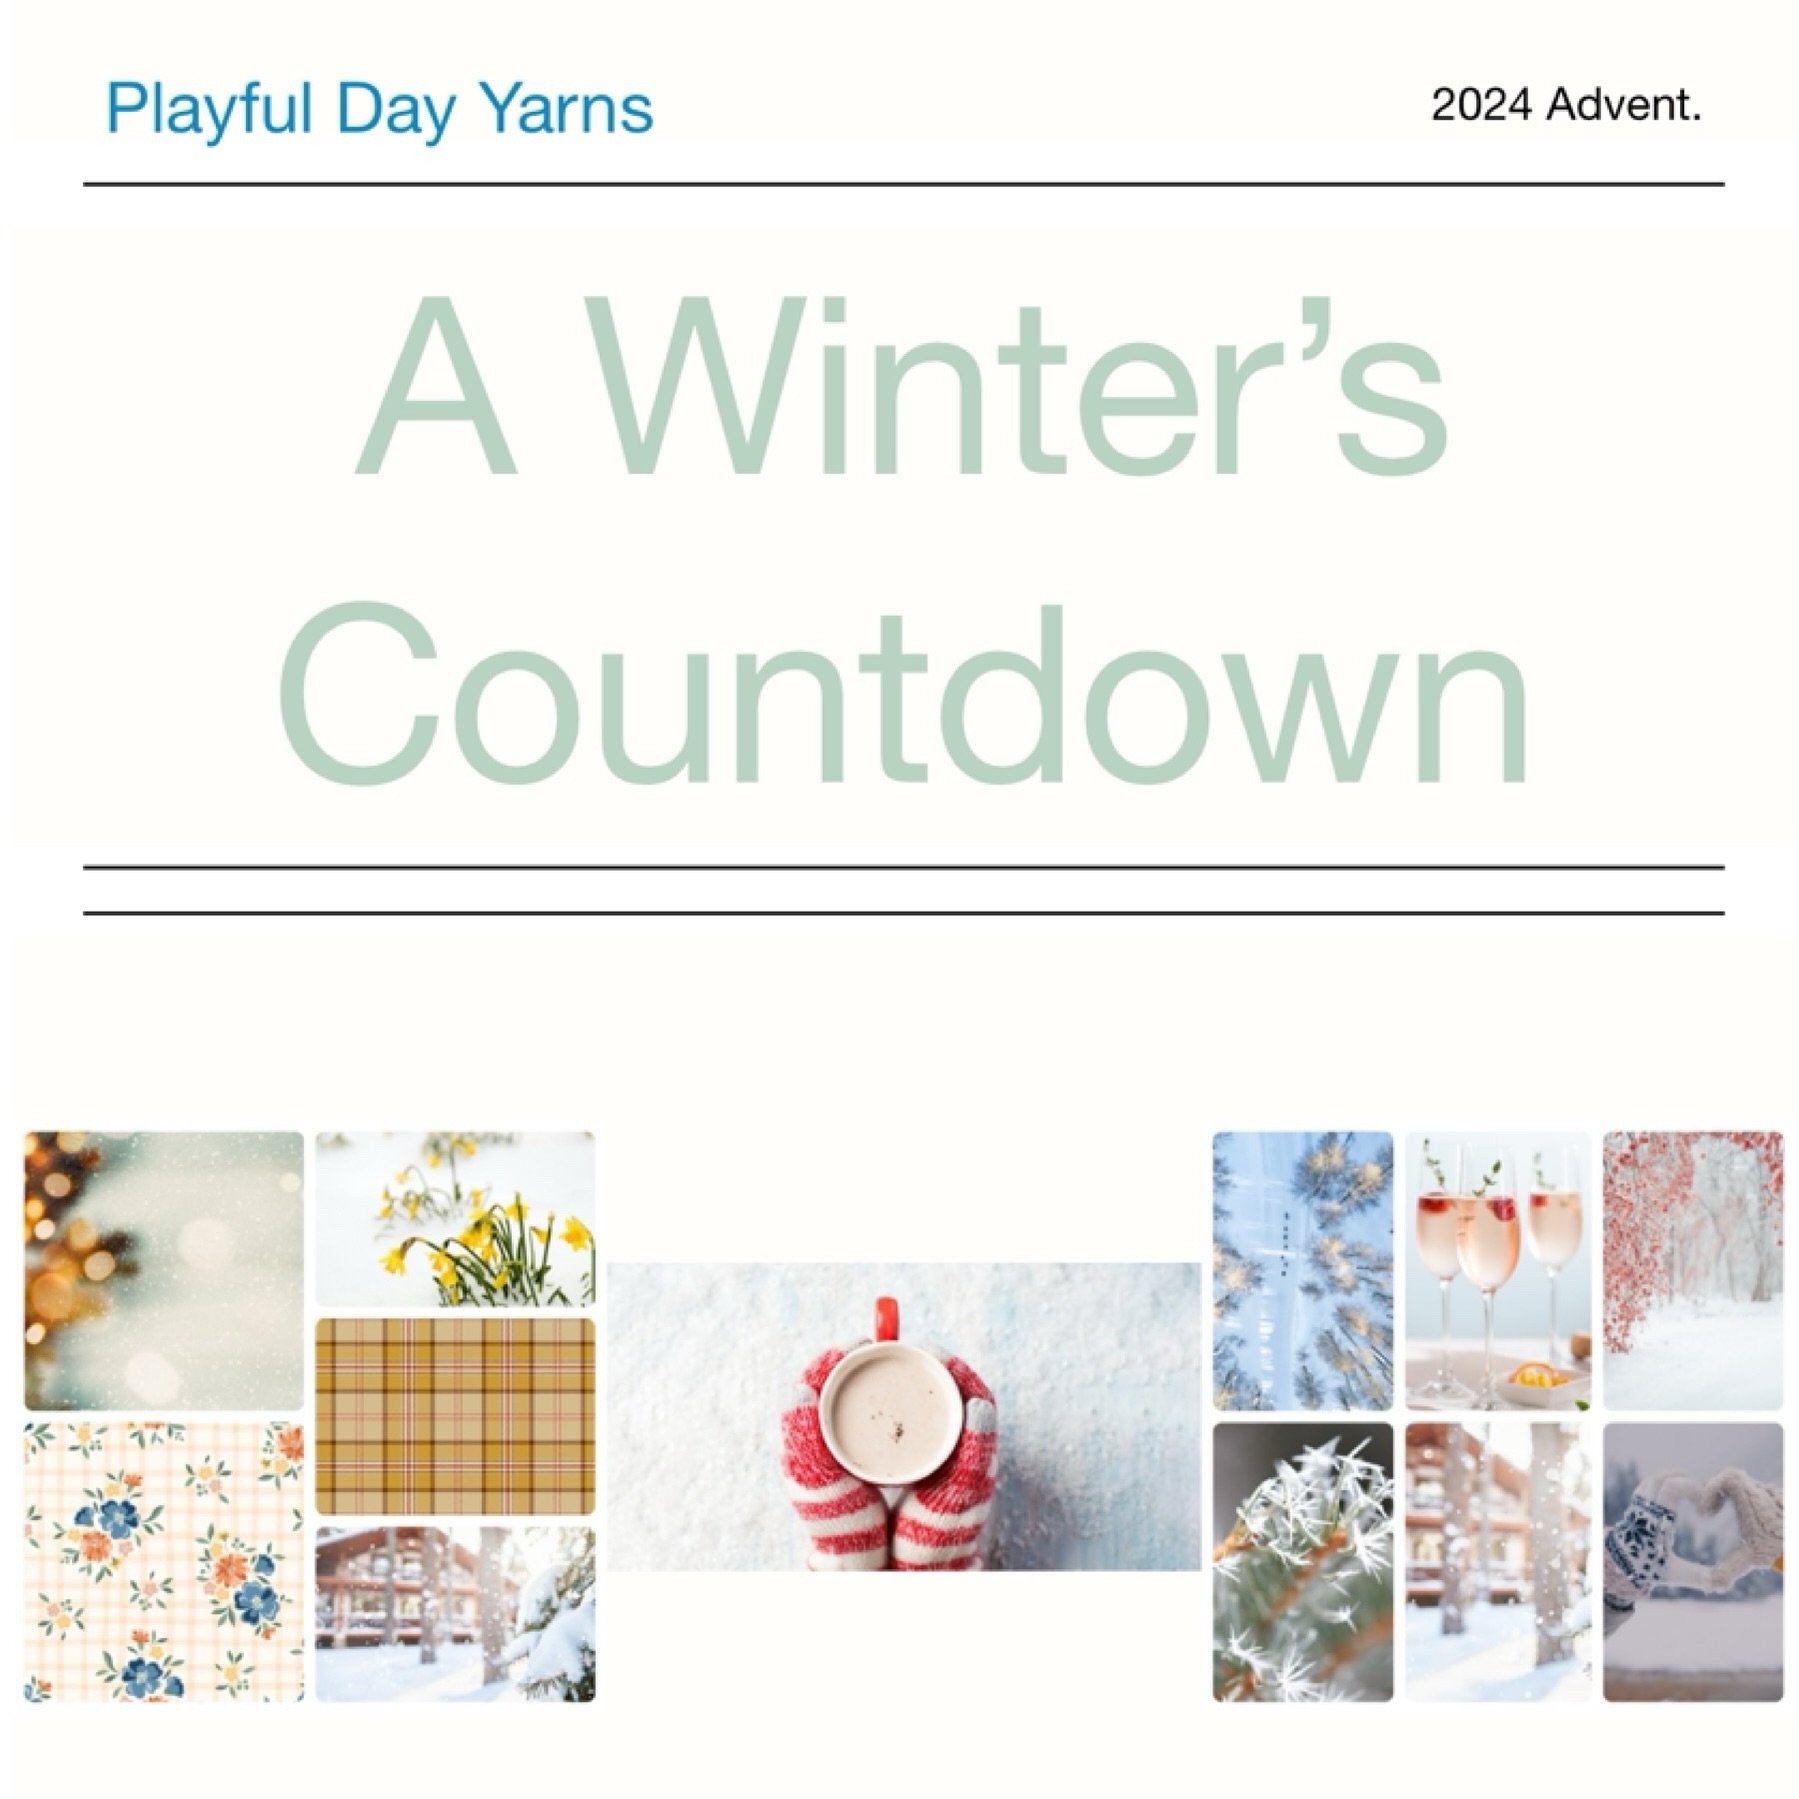 It&rsquo;s time to announce&hellip;. A Winter&rsquo;s Countdown 2024!

I have wanted to curate this theme for quite possibly years now. I obsessed about gathered all the photos that would best bring life to my vision as much as possible&hellip;and I&